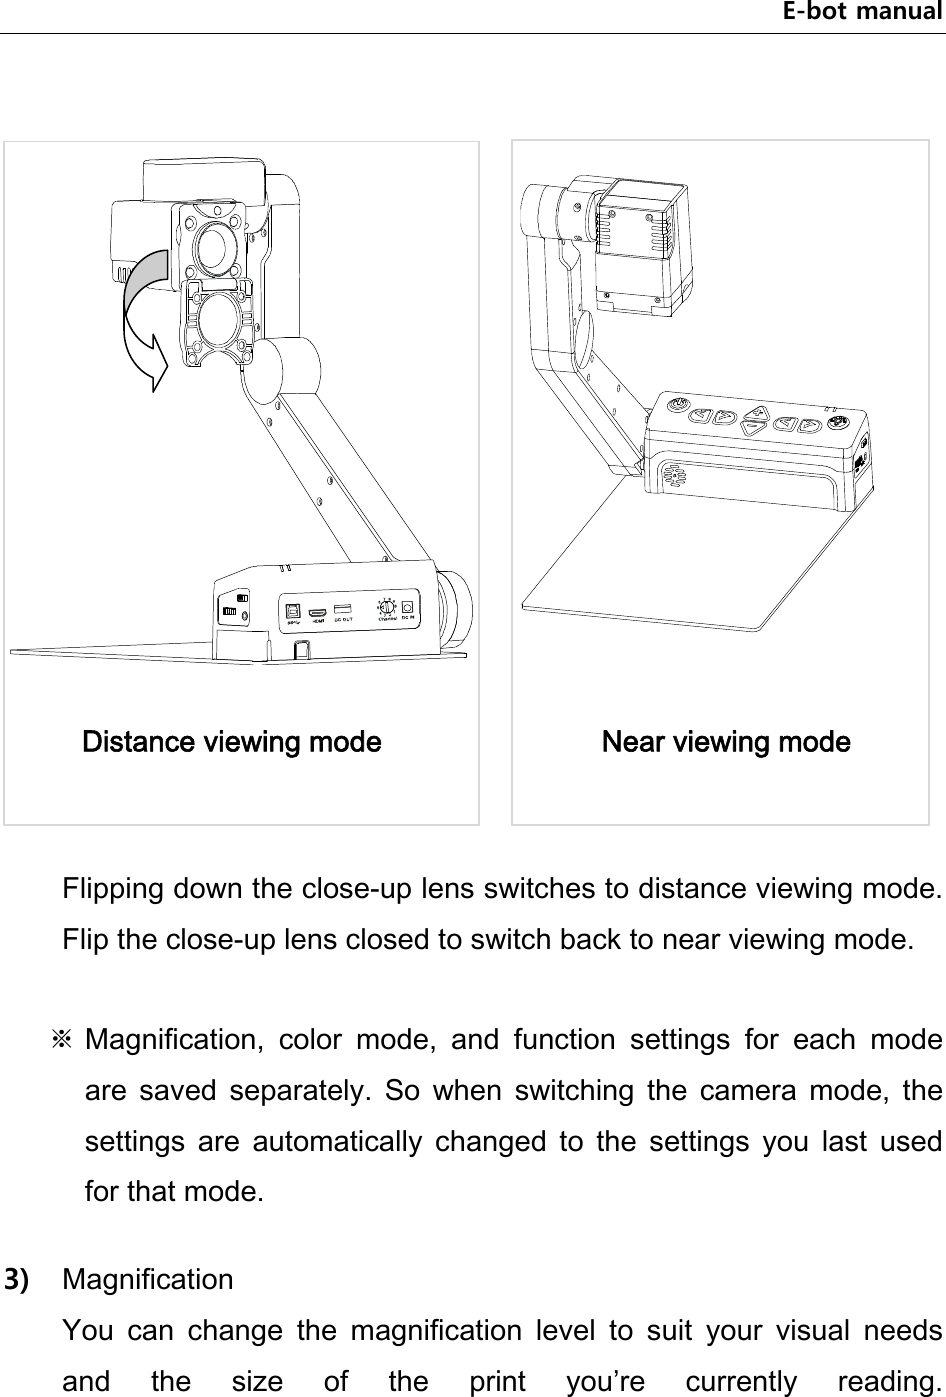 E-bot manual          Flipping down the close-up lens switches to distance viewing mode. Flip the close-up lens closed to switch back to near viewing mode.  ※ Magnification,  color  mode,  and  function  settings  for  each  mode are  saved  separately.  So  when  switching  the  camera  mode,  the settings  are  automatically  changed  to  the  settings  you  last  used for that mode.    3) Magnification You  can  change  the  magnification  level  to  suit  your  visual  needs and  the  size  of  the  print  you’re  currently  reading. Near viewing mode Distance viewing mode 